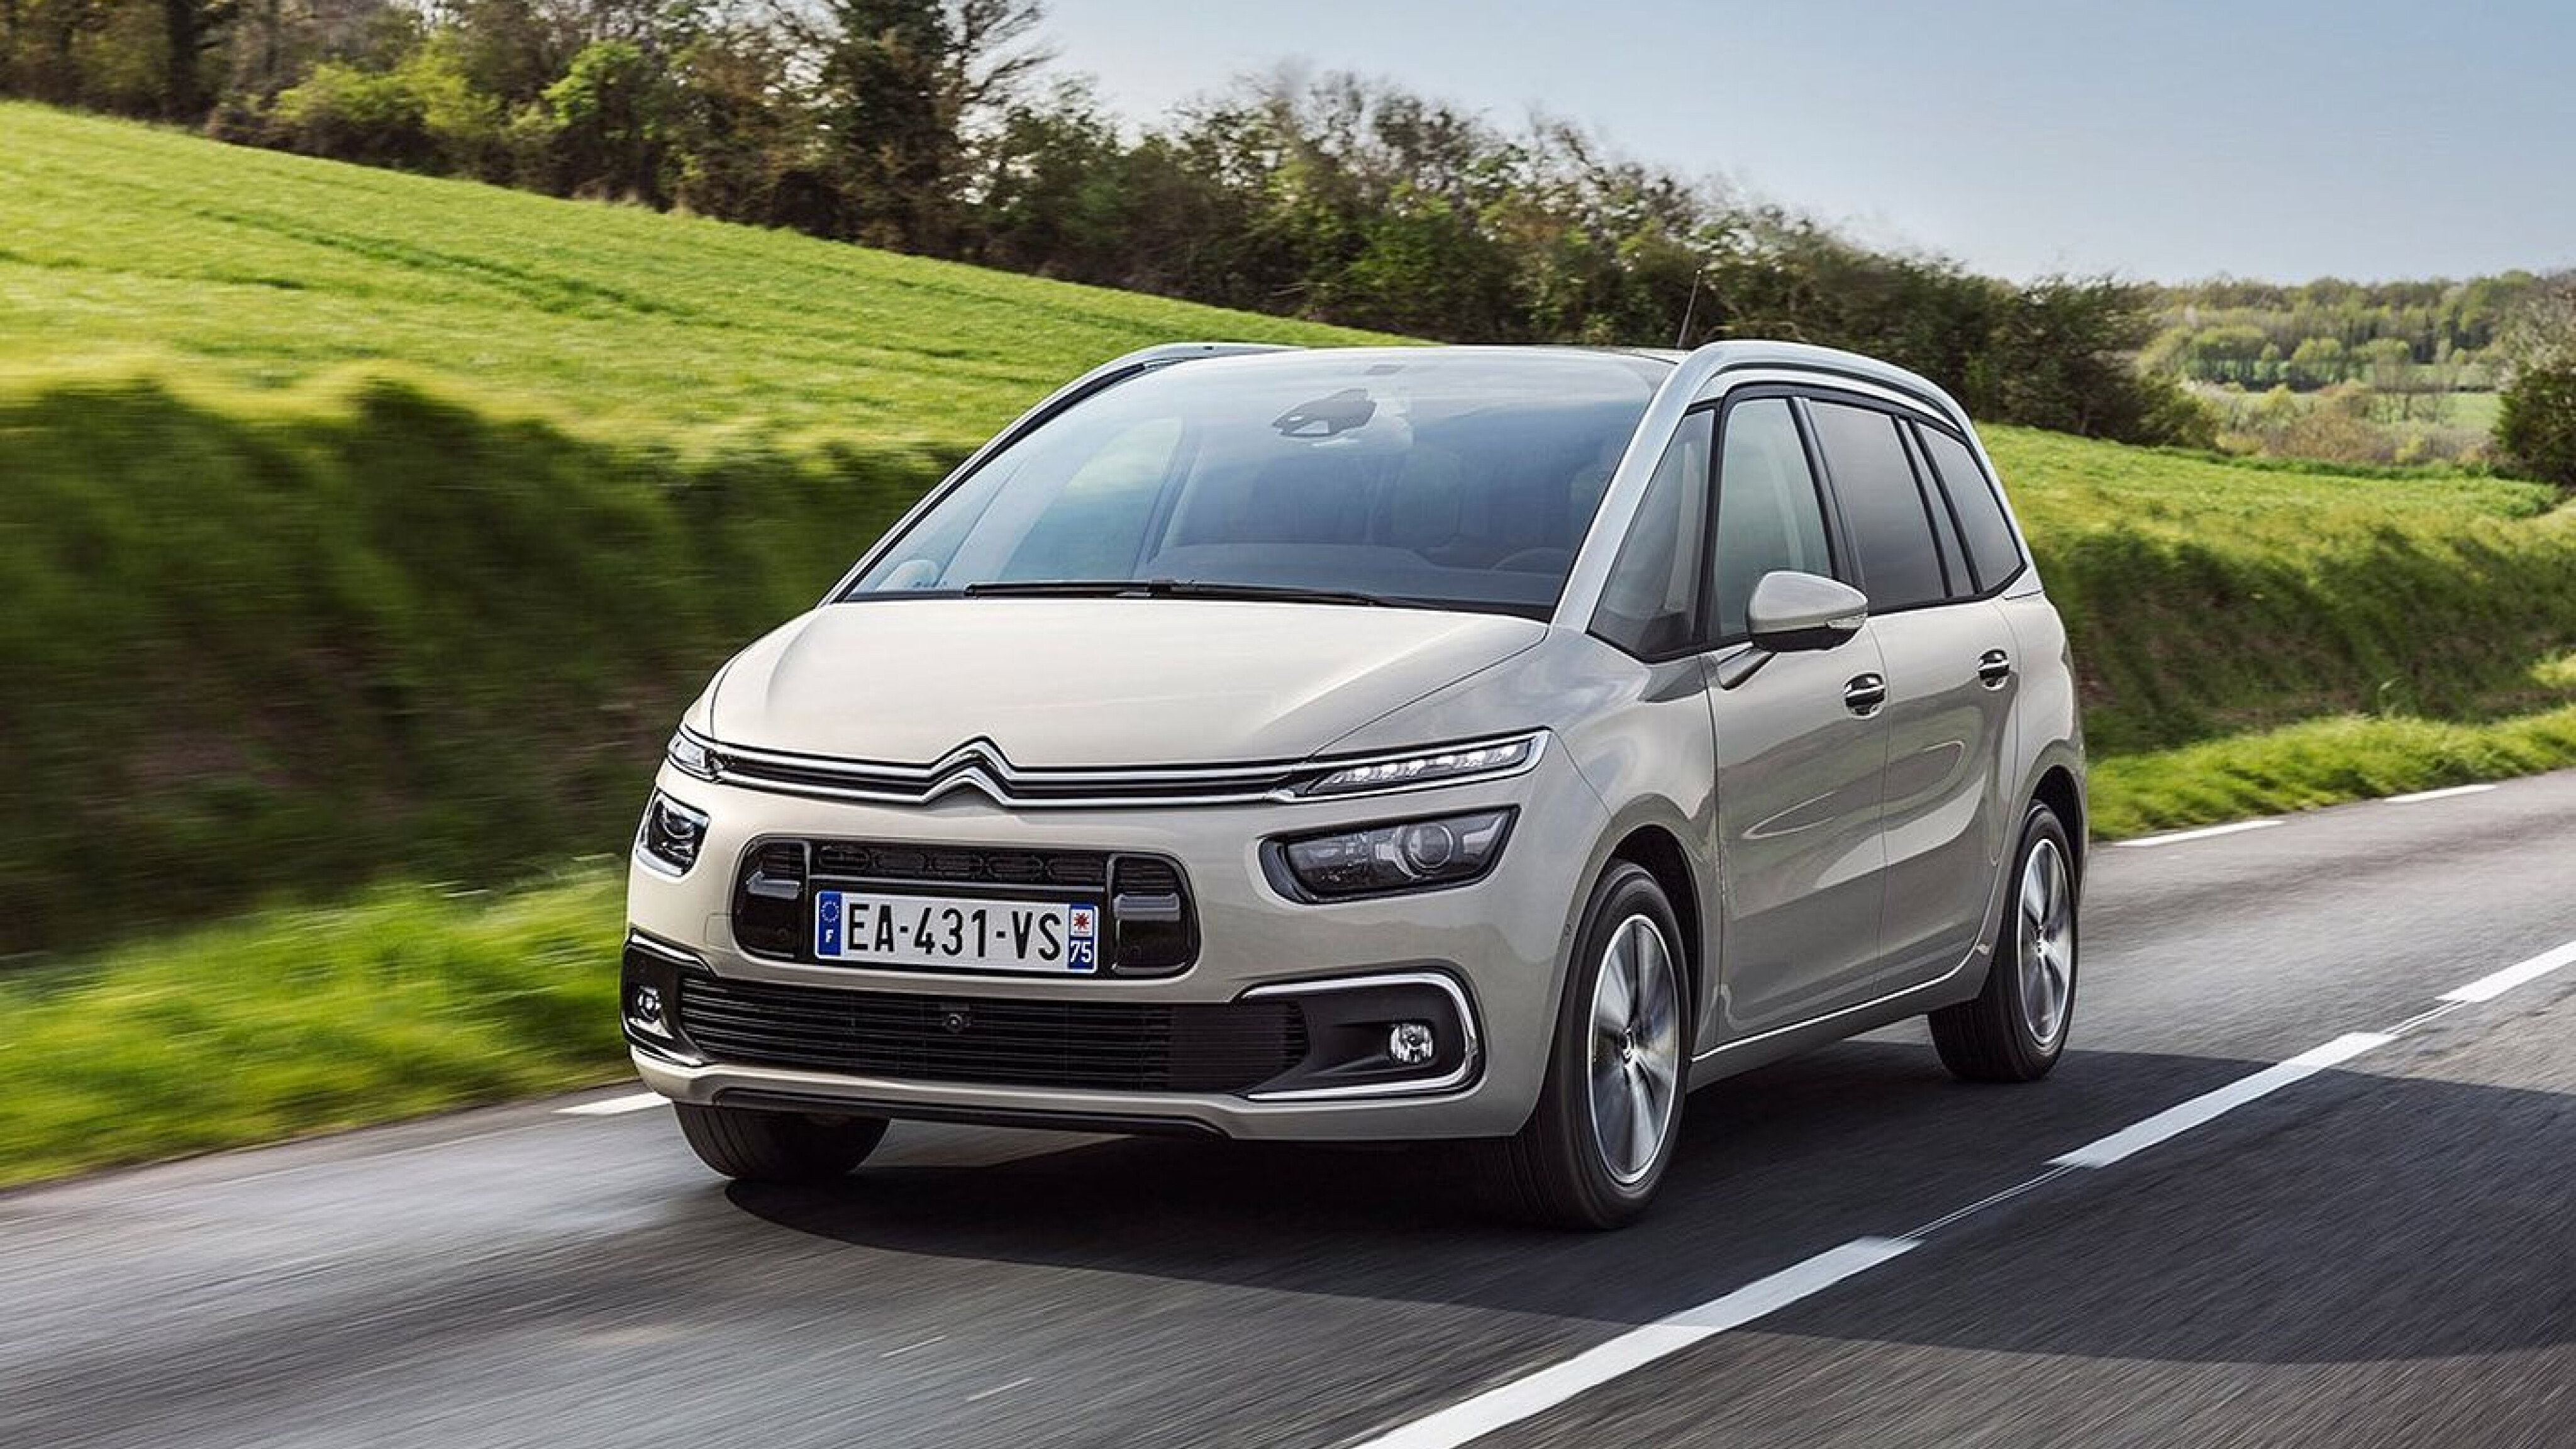 2018 Citroen Grand C4 Picasso pricing and features revealed